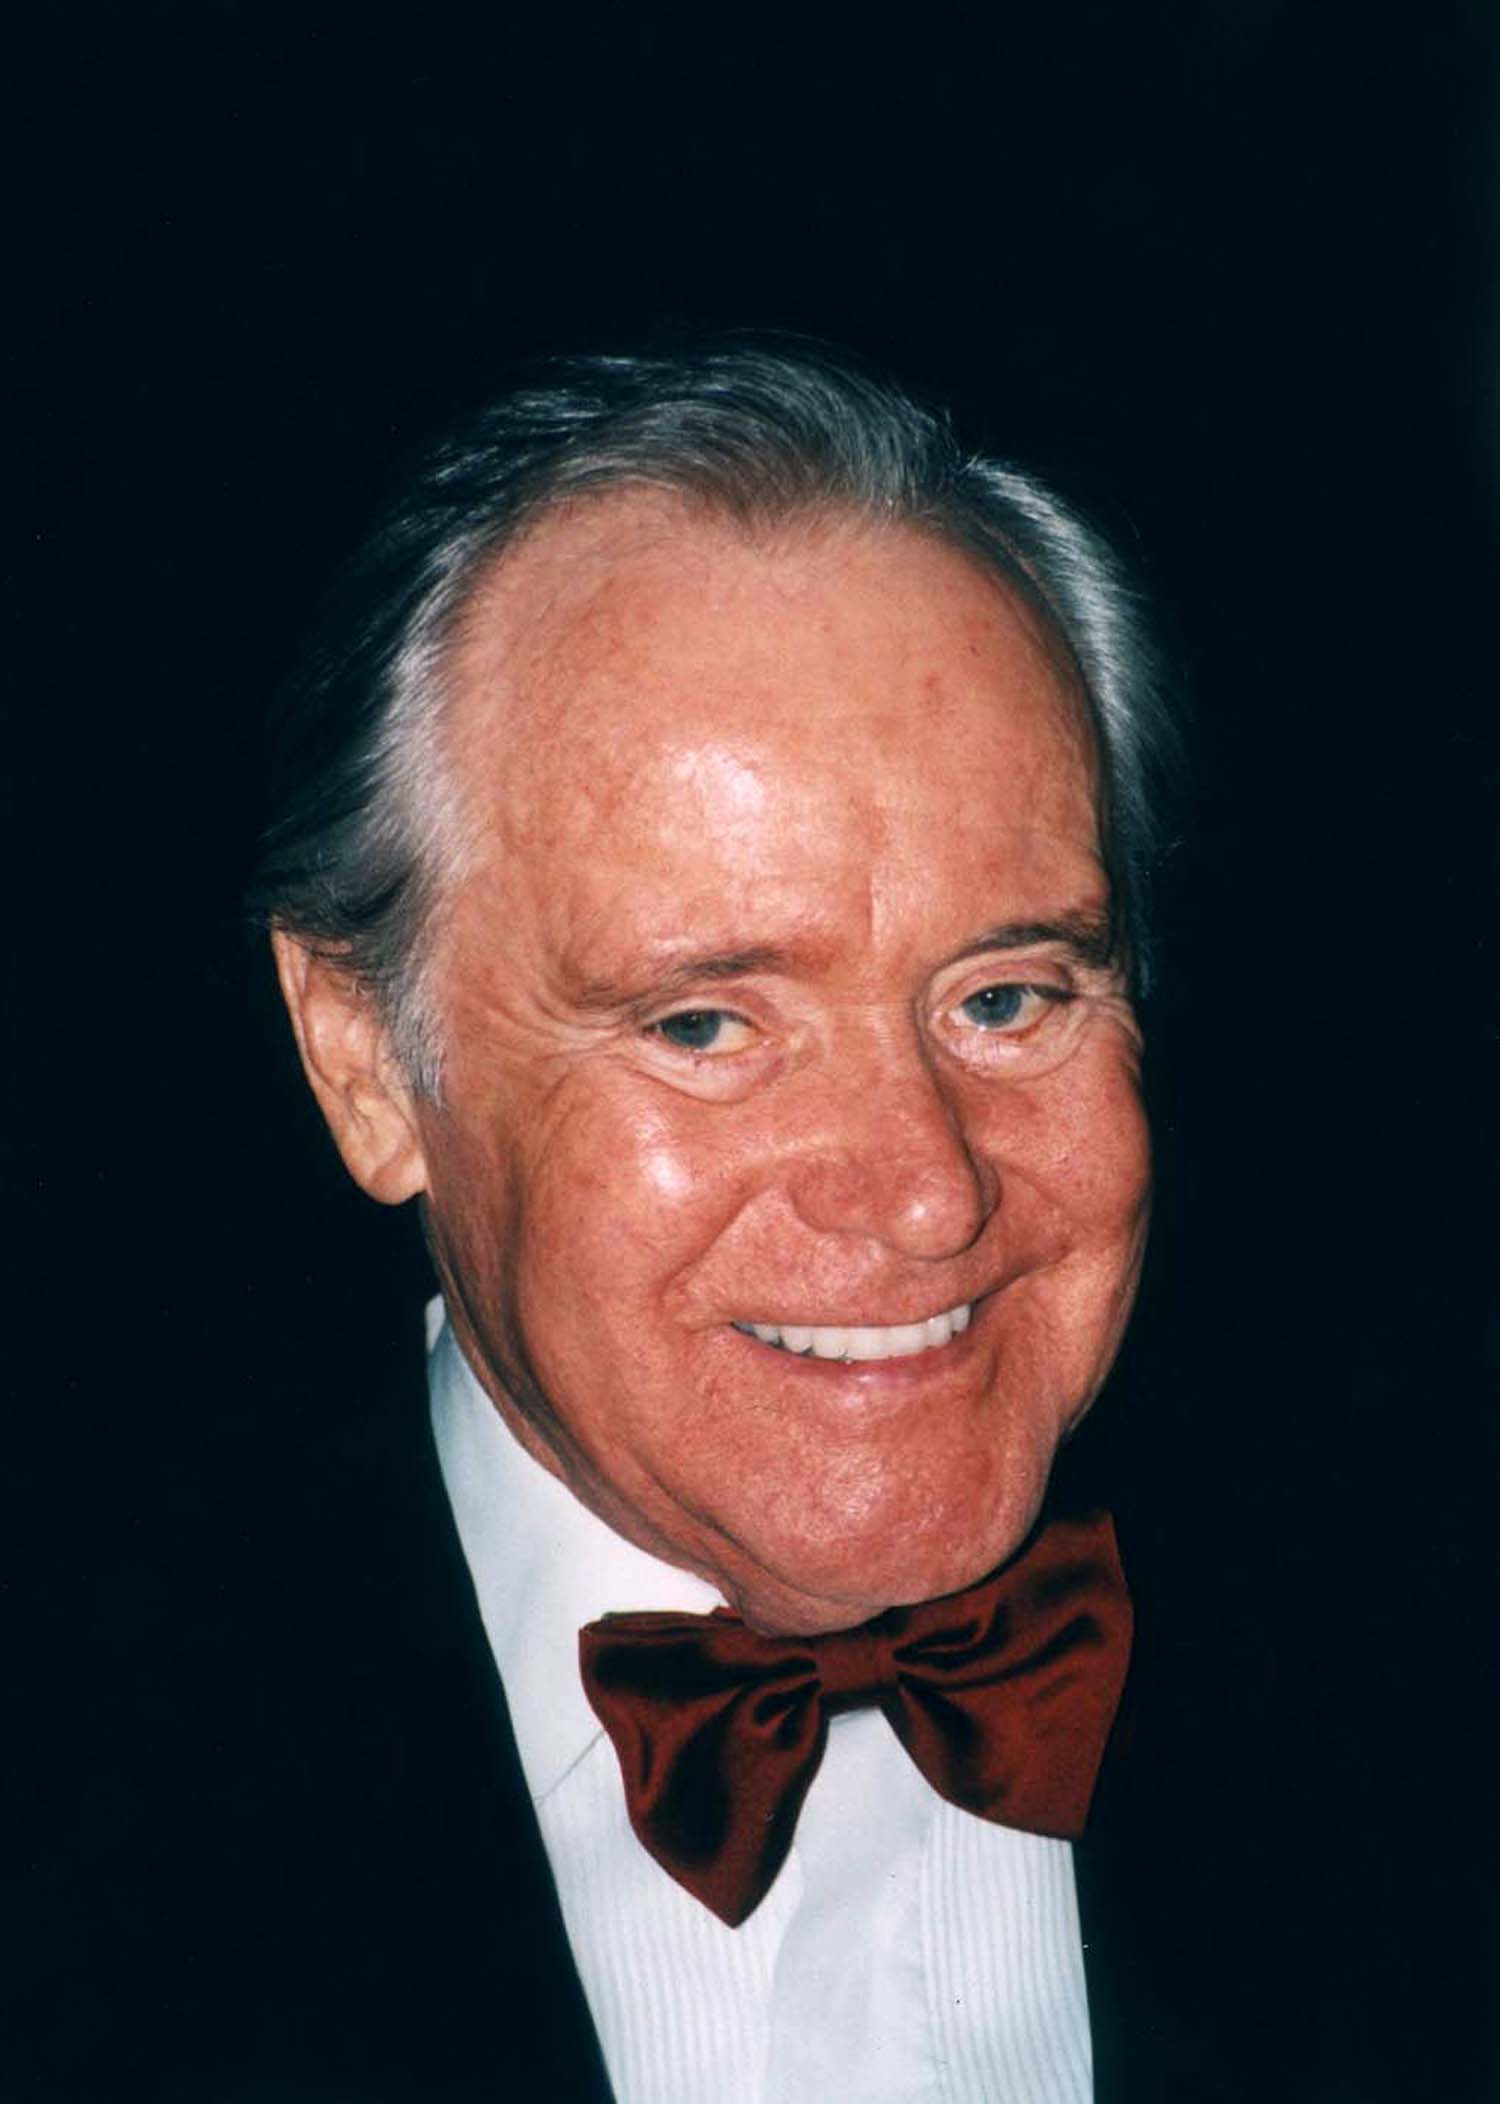 A photo of actor Jack Lemmon from 2002. | Photo: Wikimedia Commons